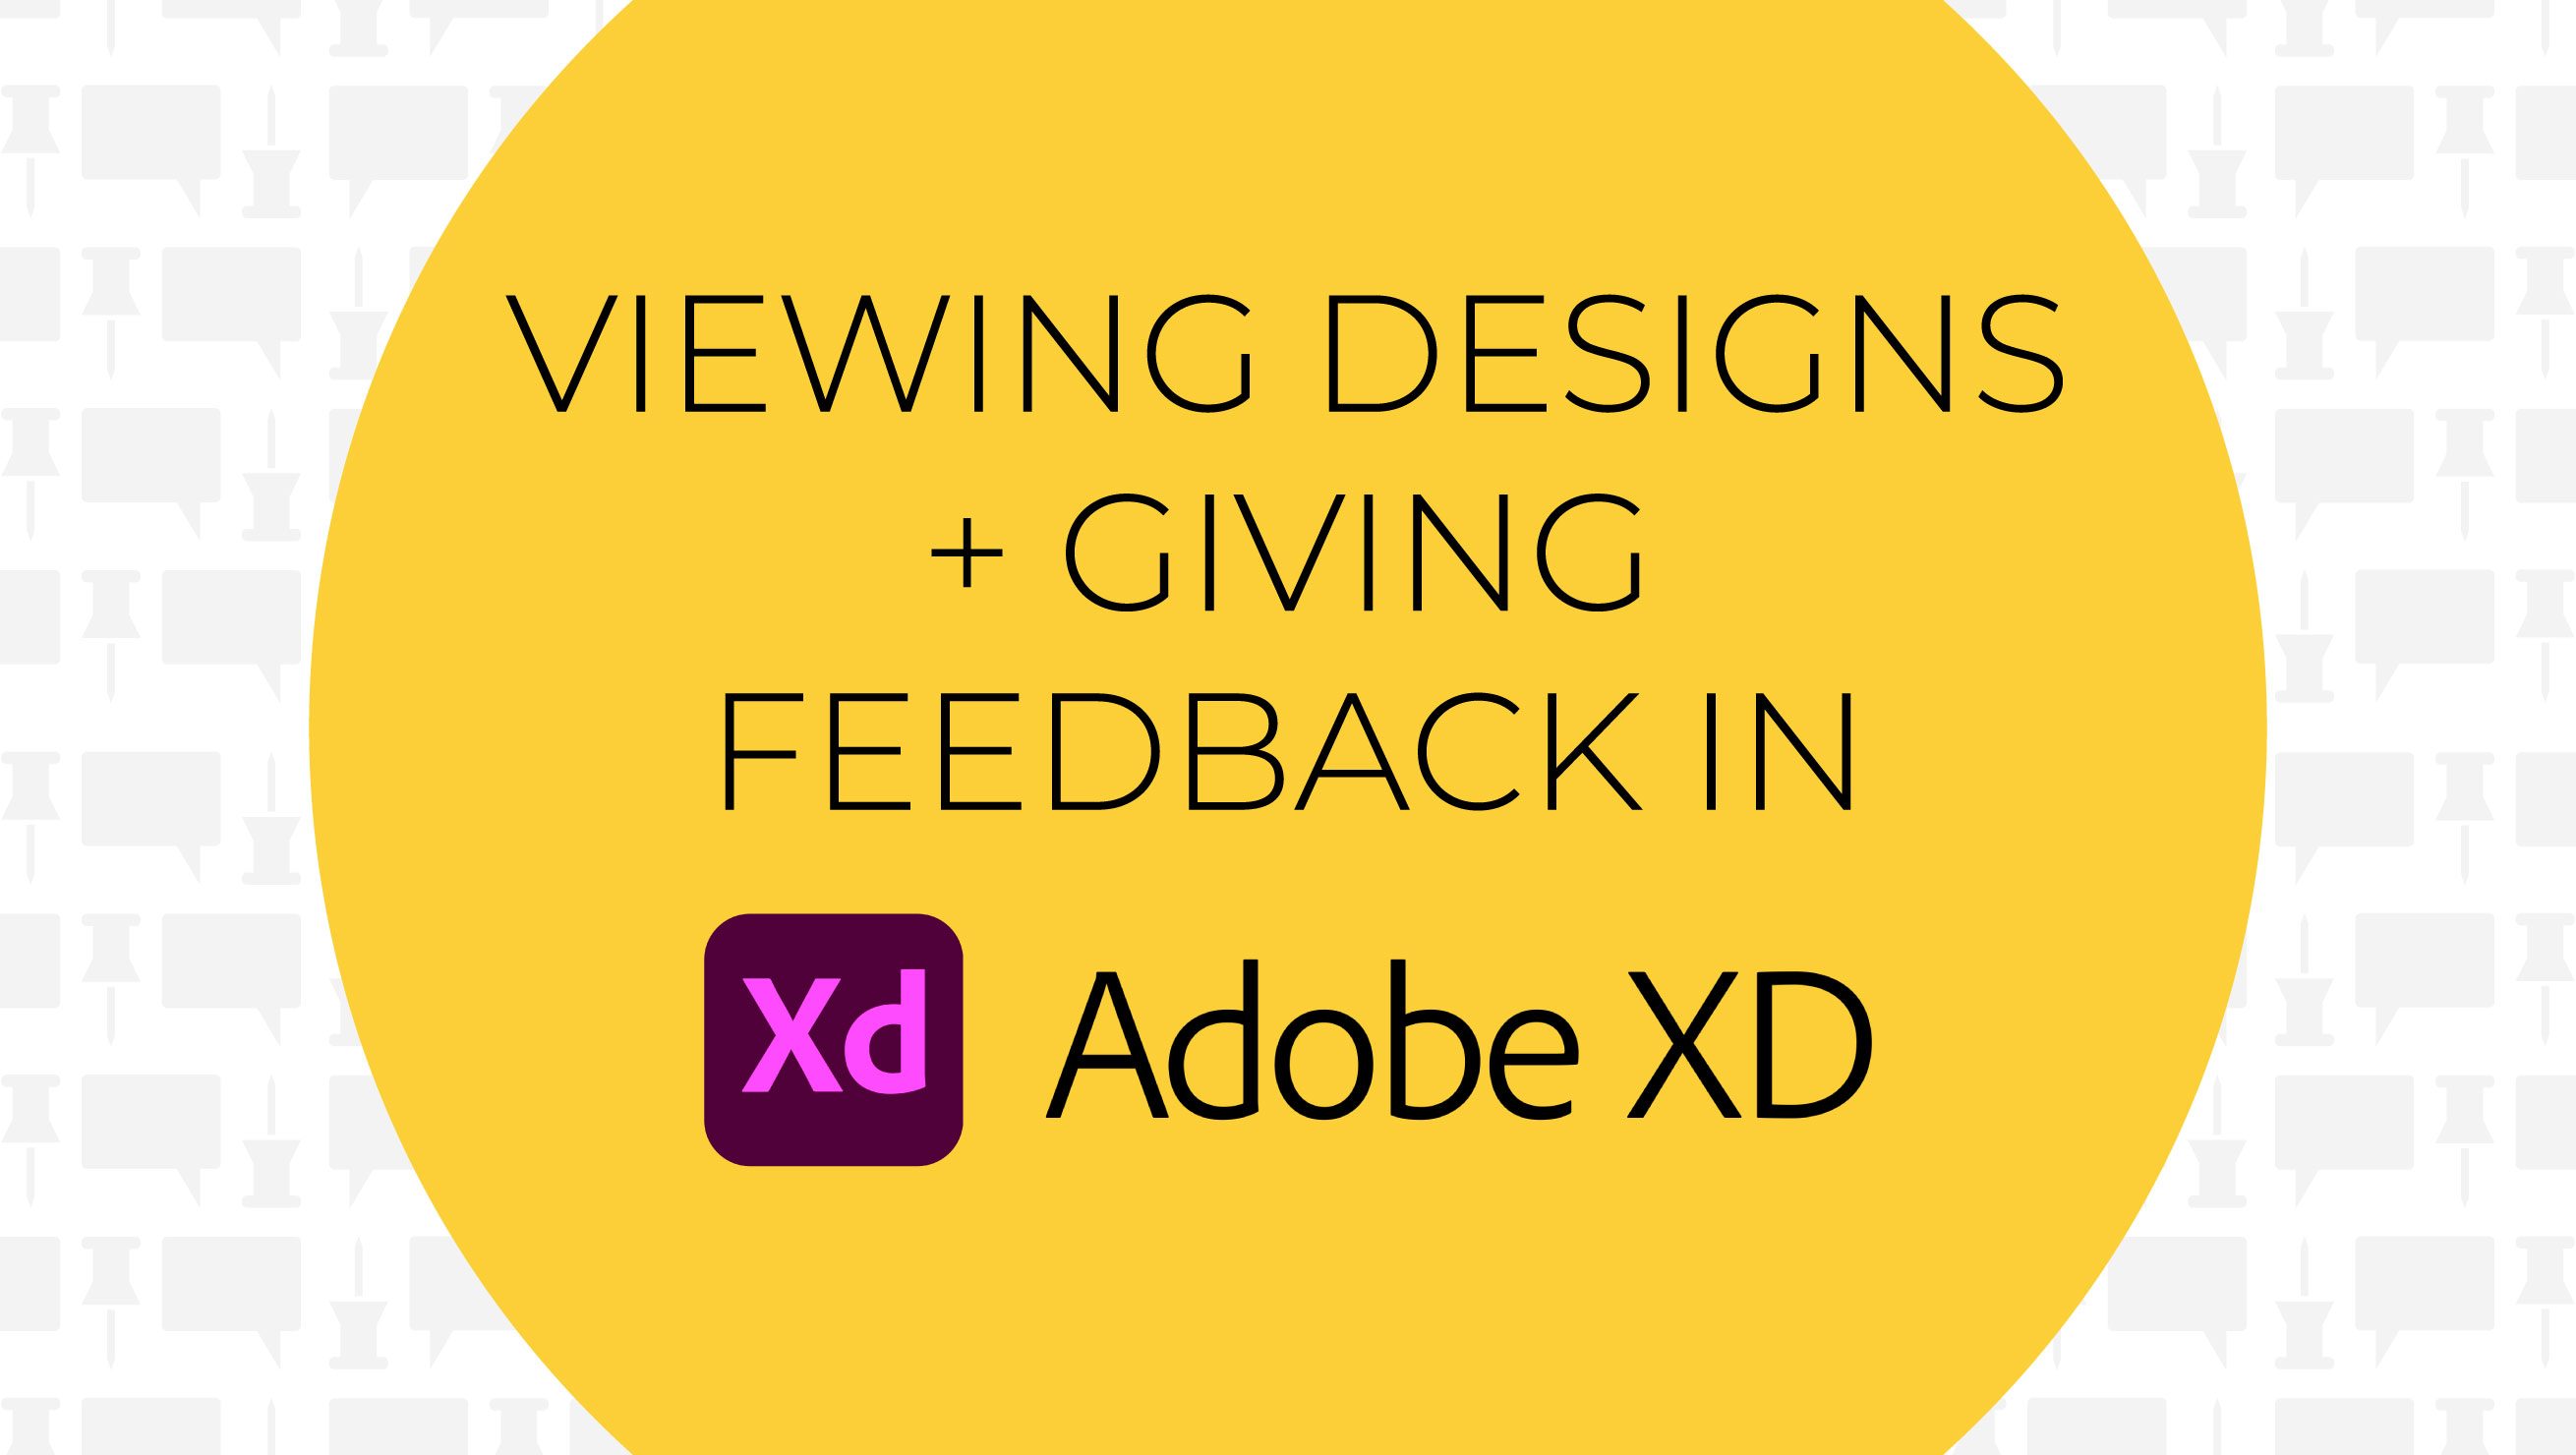 Viewing Designs and Giving Feedback in Adobe XD